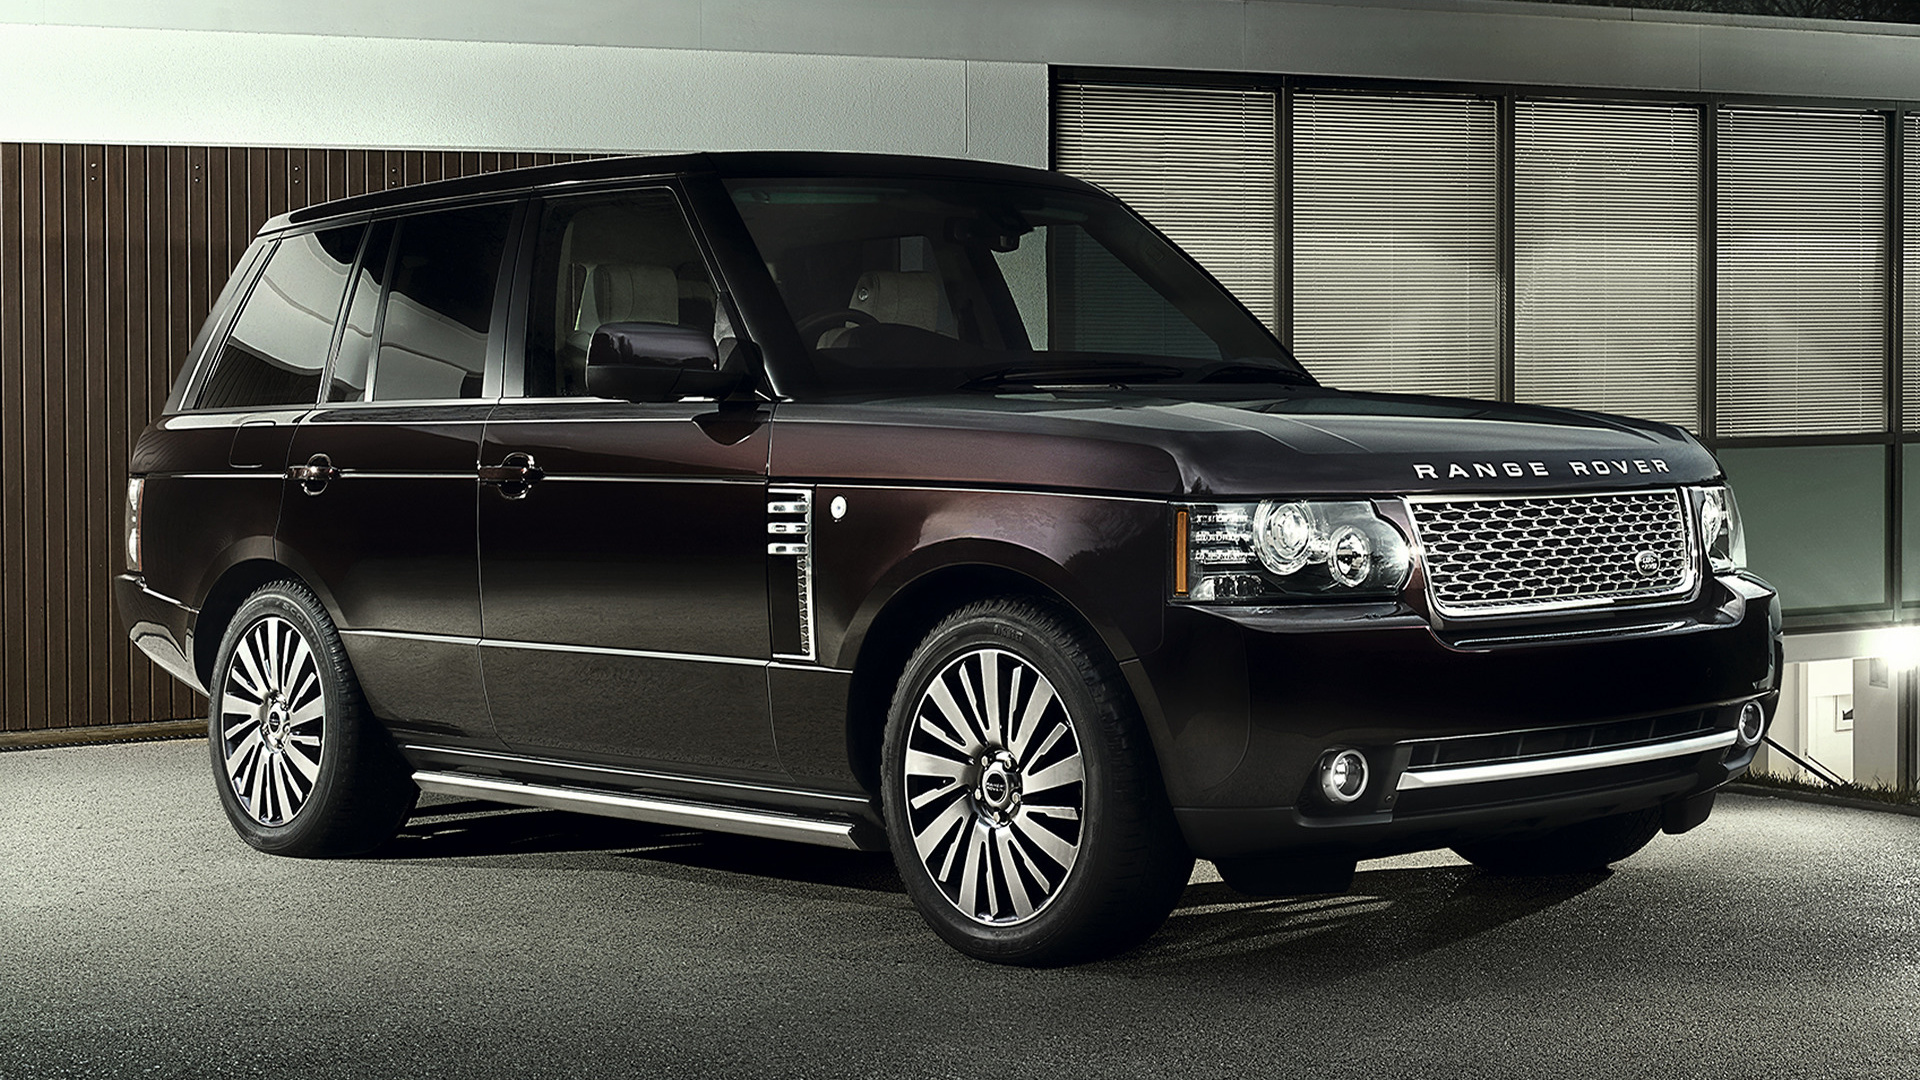 2011 Range Rover Autobiography Ultimate Edition (UK) - Wallpapers and ...